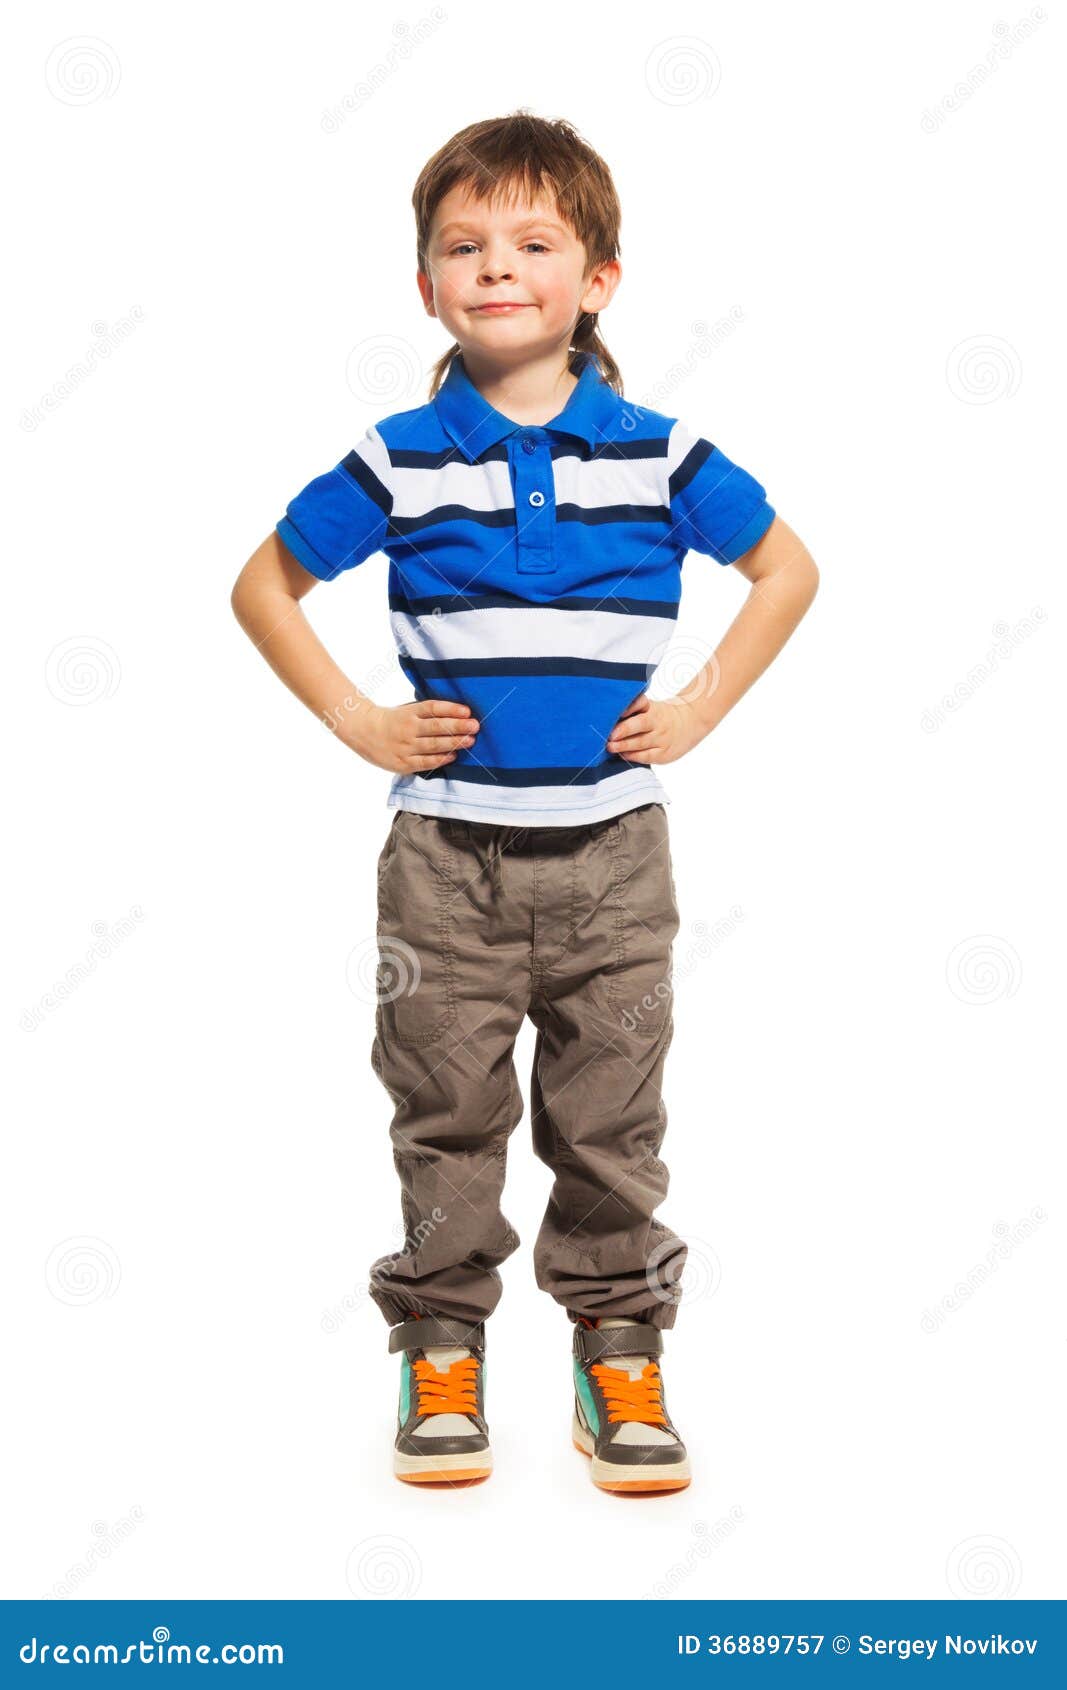 years-old-boy-full-height-portrait-standing-isolated-white-36889757.jpg